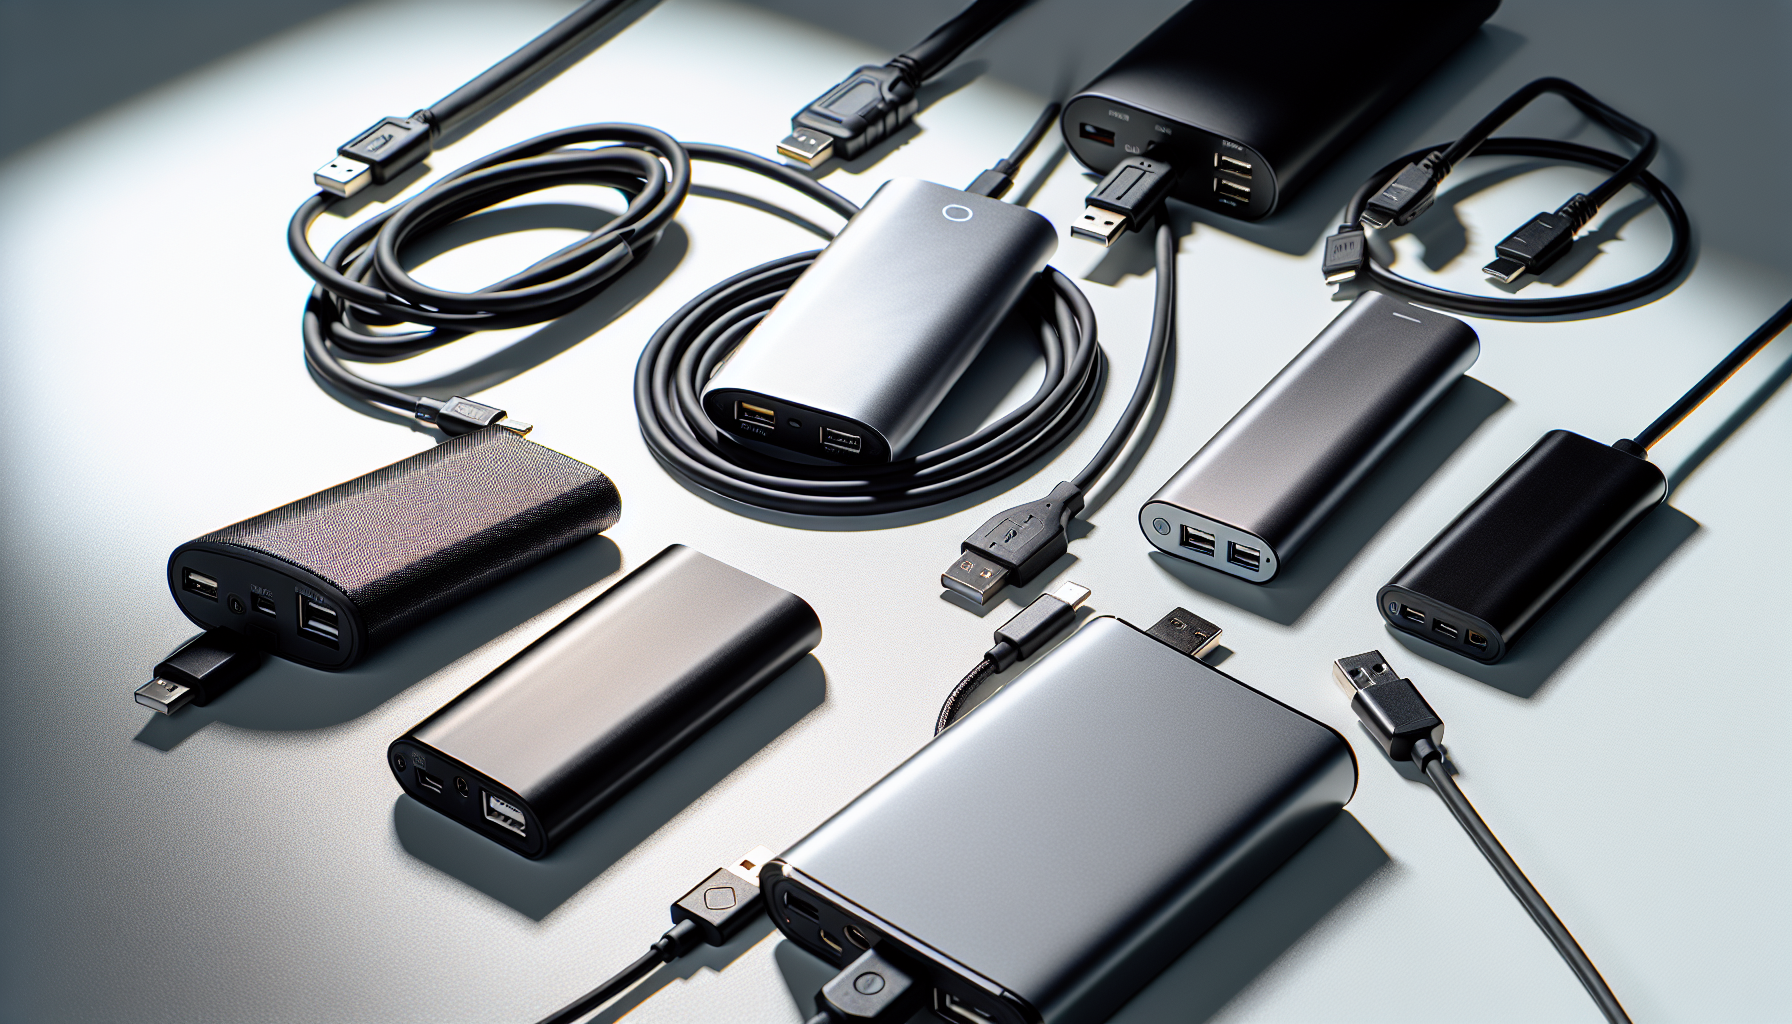 Various power banks and charging cables